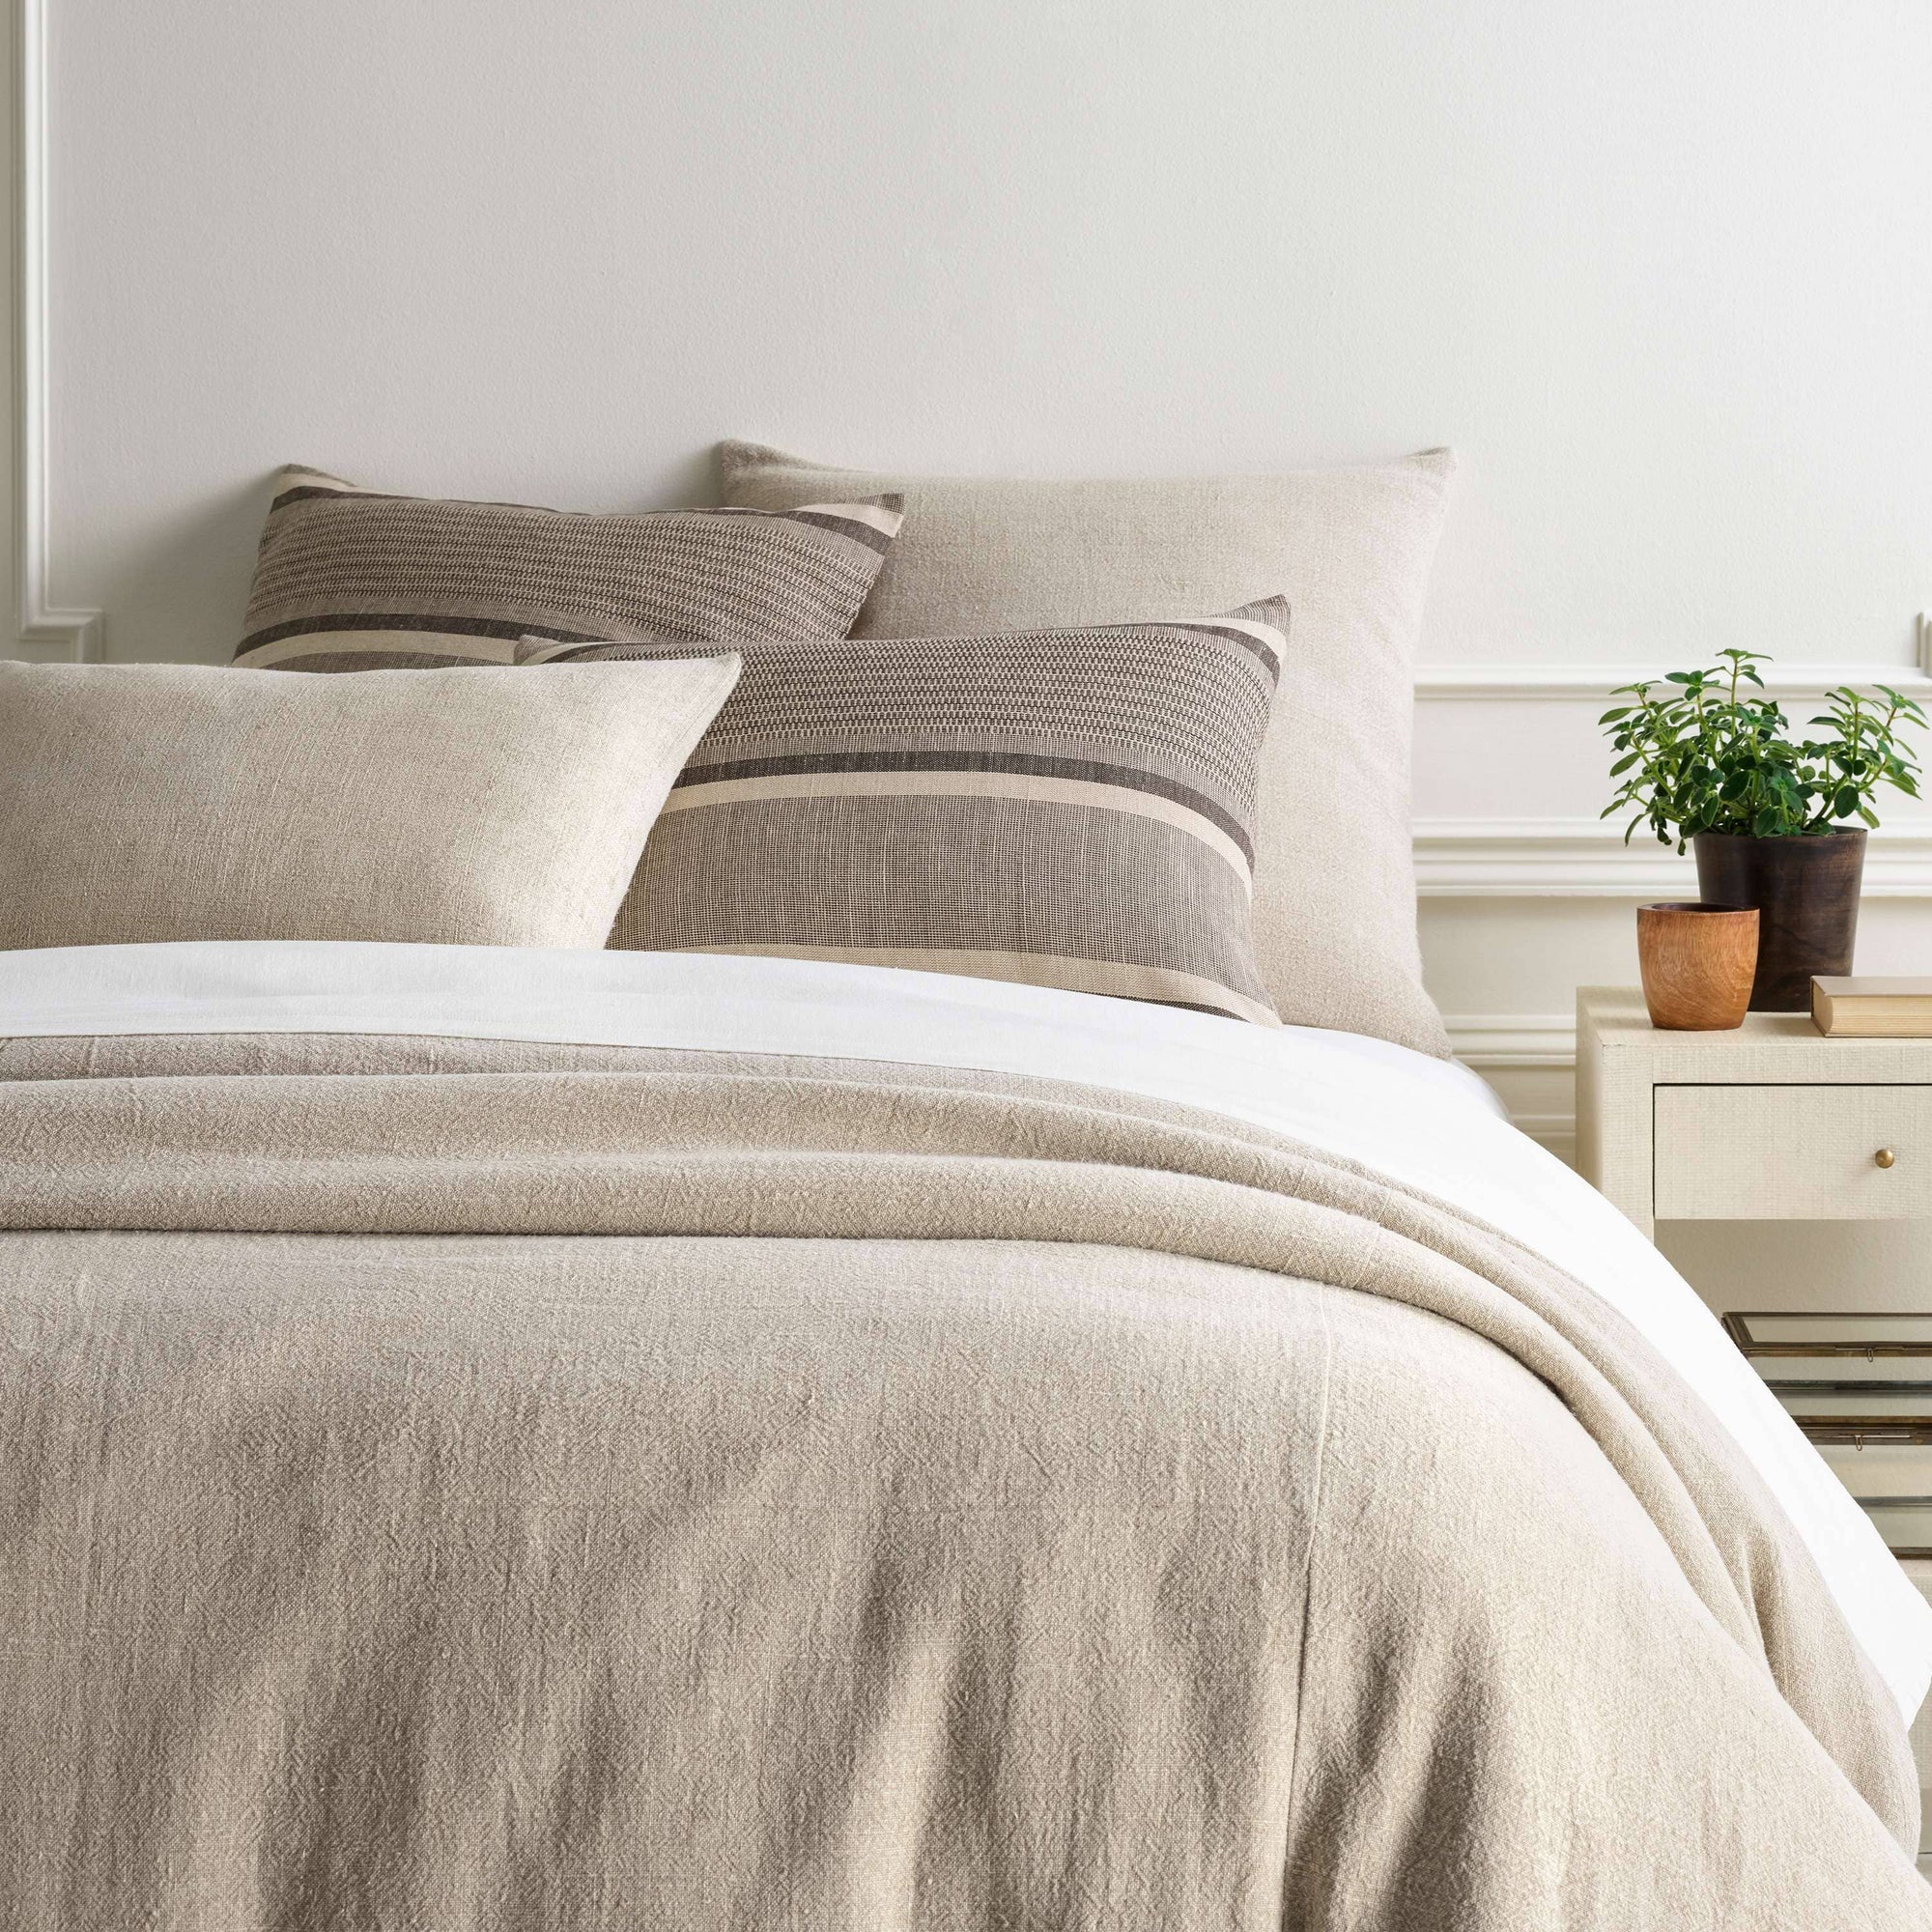 Stone Washed Linen Natural duvet cover